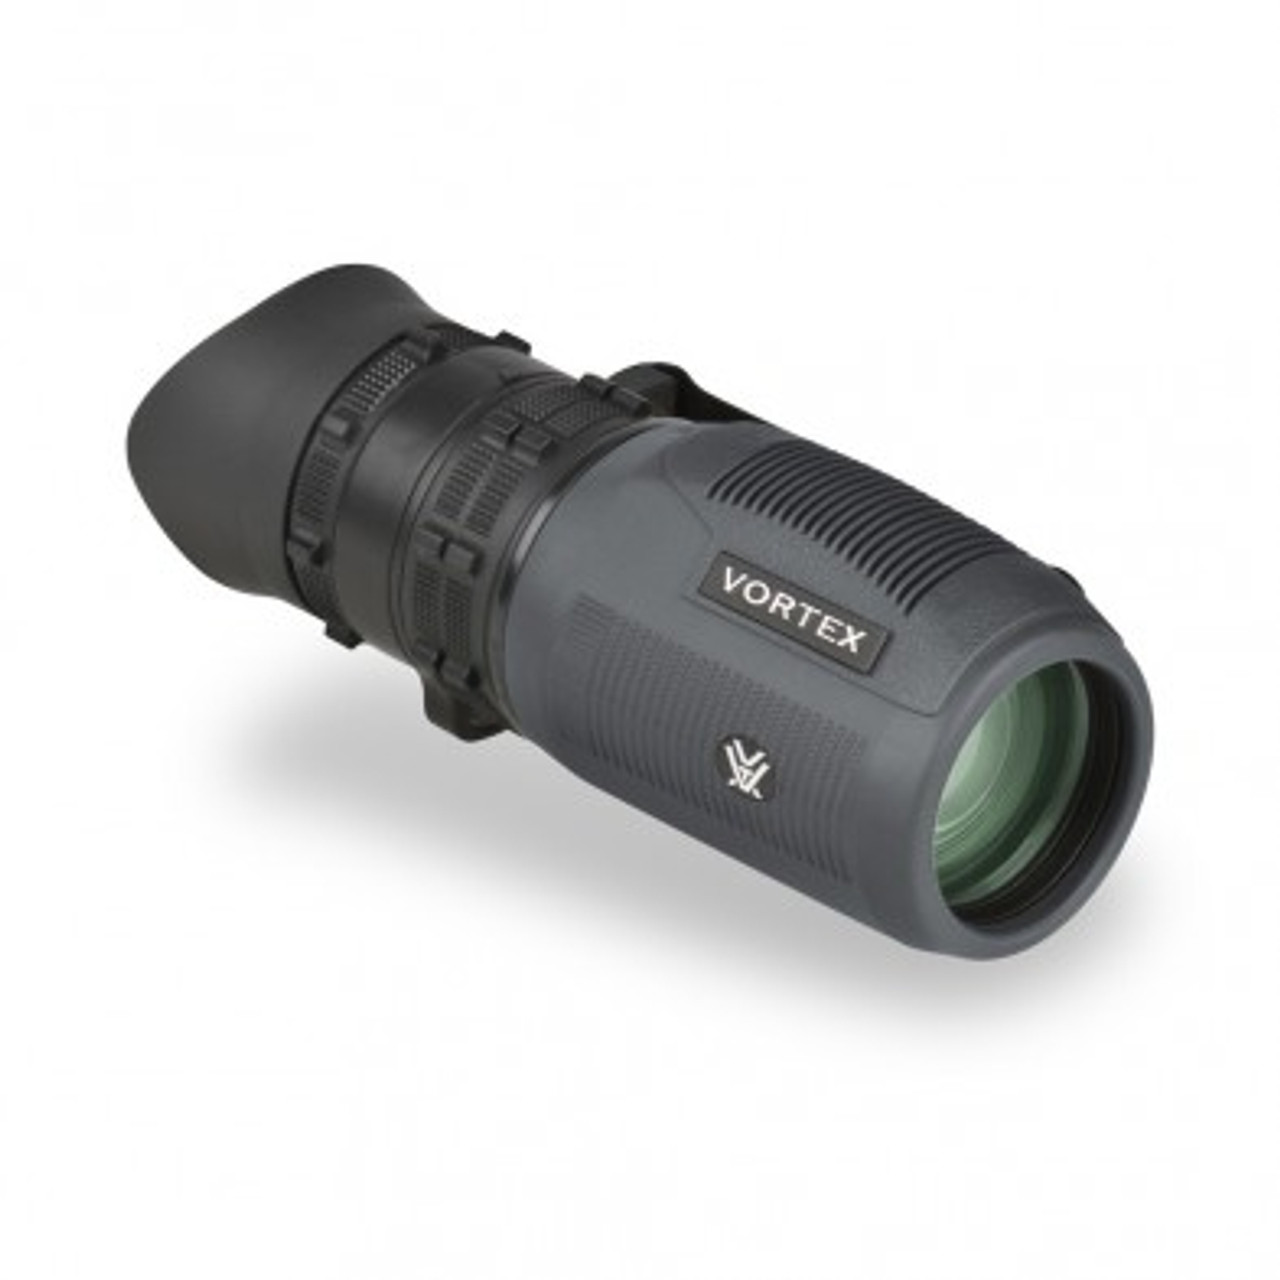 Built to be carried as a standard piece of equipment and close-at-hand, the Solo R/T Tactical Monocular gives a closer look when needed. Features the Vortex R/T Ranging Reticle with reticle focus for accurate range estimation and calling shots. The integral utility clip attaches to webbing or other flat-edged surfaces for quick external access. Fully multi-coated glass surfaces deliver bright images in a compact, lightweight, and easy to handle unit.

Magnification	8 x
Objective Lens Diamter	36 mm
Eye Relief	18 mm
Exit Pupil	4.5 mm
Linear Field of View	393 feet/1000 yards
Angular Field of View	7.5 degrees
Close Focus	16.4 feet
Length	5.4 inches
Width	2.3 inches
Had Grip Width	2 inches
Weight	10.2 ounces


OPTICAL FEATURES
Fully Multi-Coated	Increase light transmission with multiple anti-reflective coatings on all air-to-glass surfaces.
CONSTRUCTION FEATURES
Roof Prism	Valued for greater durability and a more compact size.
Waterproof	O-ring seals prevent moisture, dust and debris from penetrating the monocular for reliable performance in all environments.
Fogproof	Nitrogen gas purging delivers fogproof, waterproof performance.
Rubber Armor	Provides a secure, non-slip grip, and durable external protection.
CONVENIENCE FEATURES
Reticle Focus	Ensures a sharp reticle image at all distances.
Adjustable Eyecup	Folds up and down for comfortable viewing with or without eyeglasses. Flared to eliminate stray light and rotatable for a custom fit.
Utility Clip	The versatile, multi-position utility clip allows for multiple attachment points and quick attachment to pocket edges, equipment or vests.
